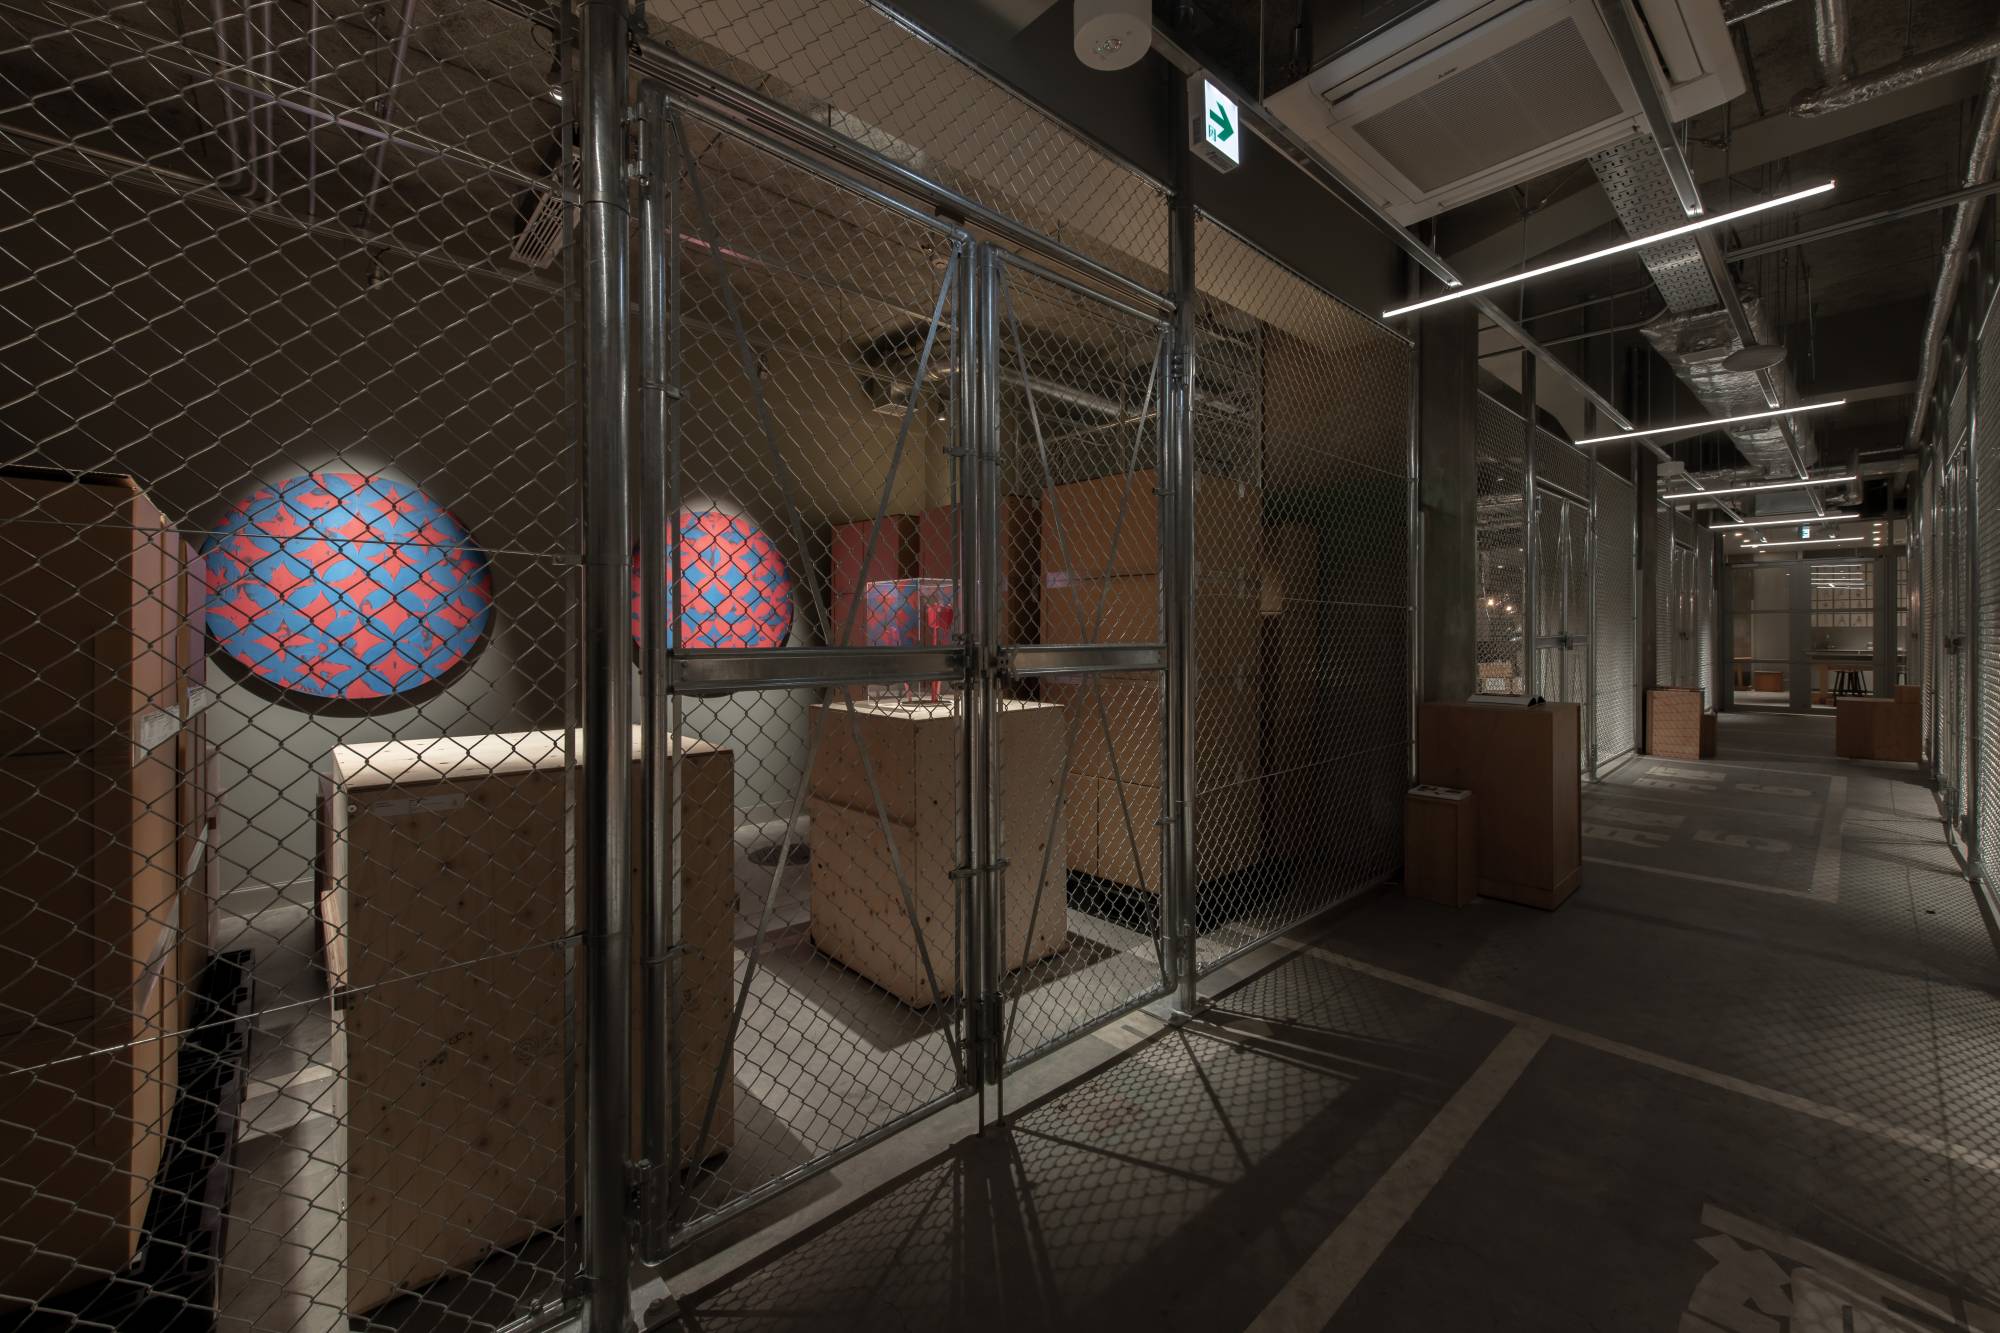 Kaika Tokyo hotel’s art storage area displays artworks that guests can view through its wire fence.